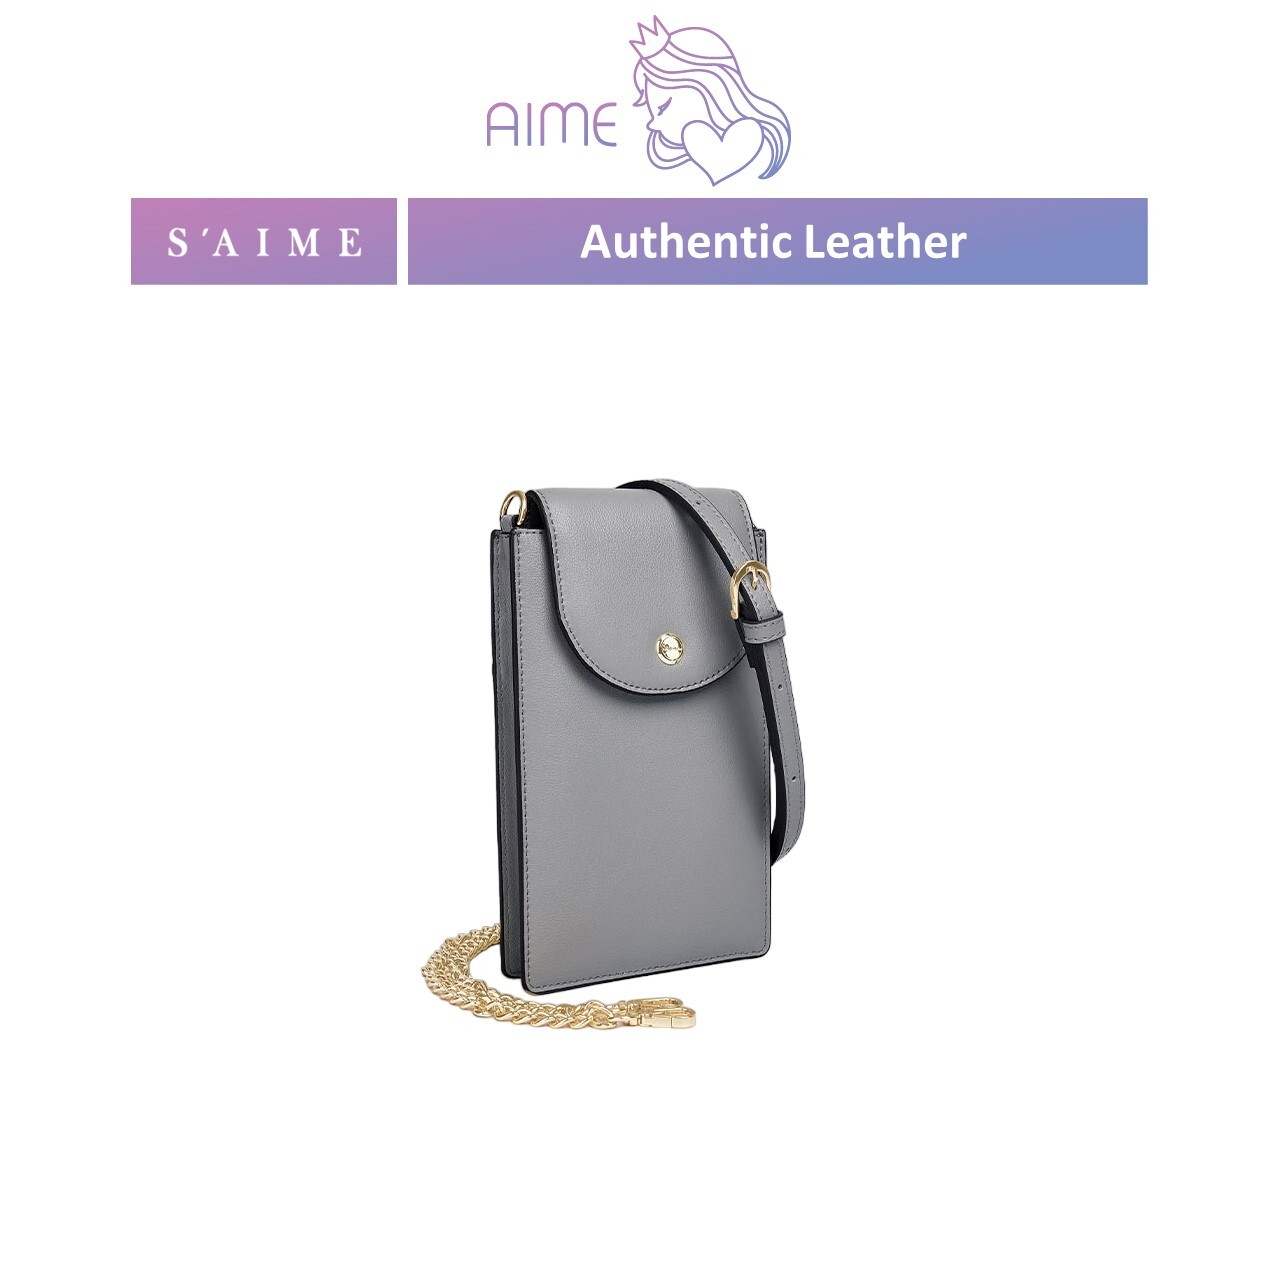 S'AIME  Authentic Leather Multifunctional Crossbody Phone Sling